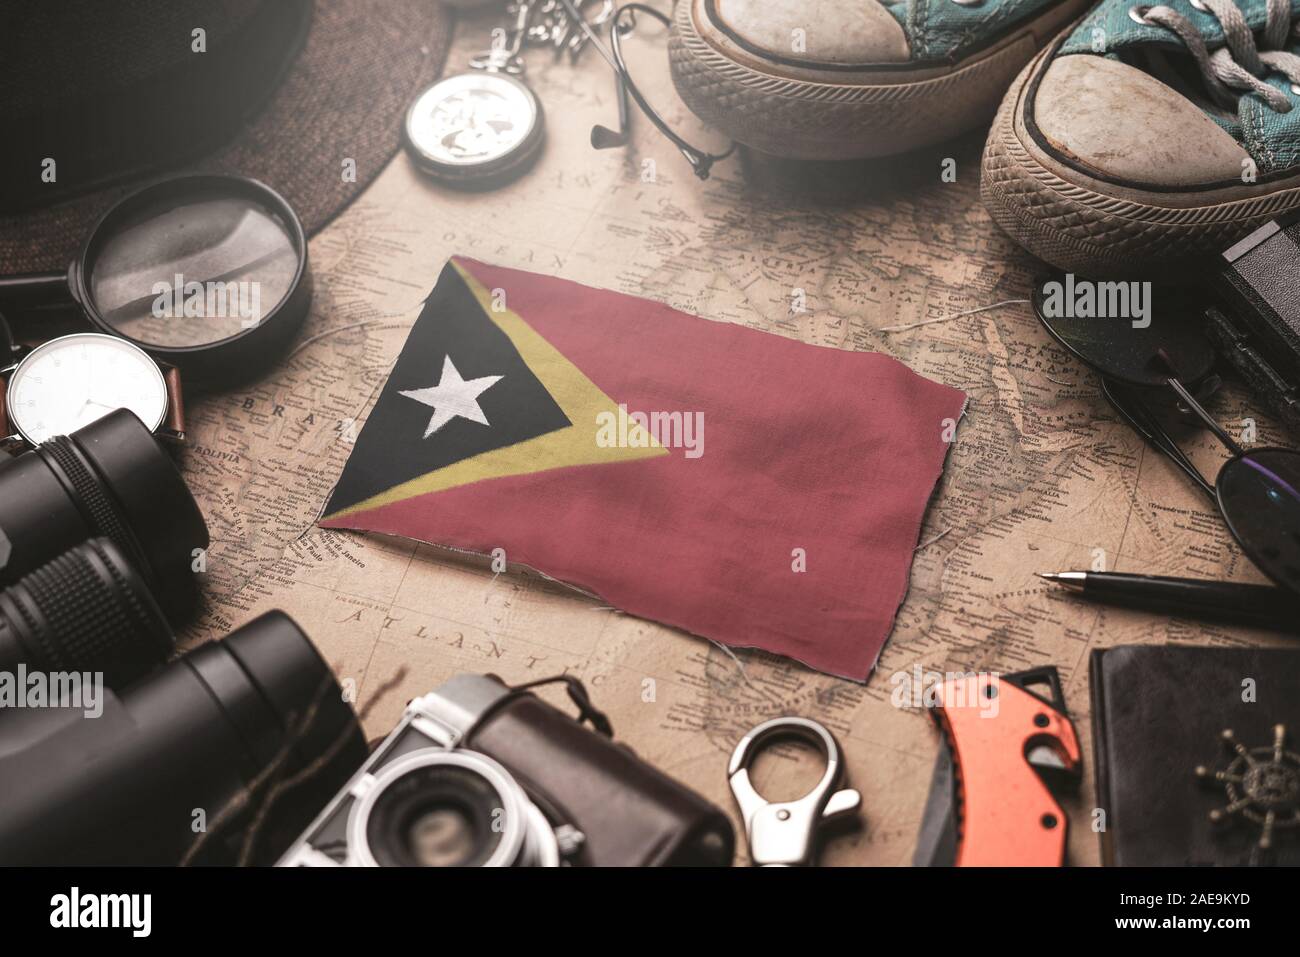 East Timor Flag Between Traveler's Accessories on Old Vintage Map. Tourist Destination Concept. Stock Photo